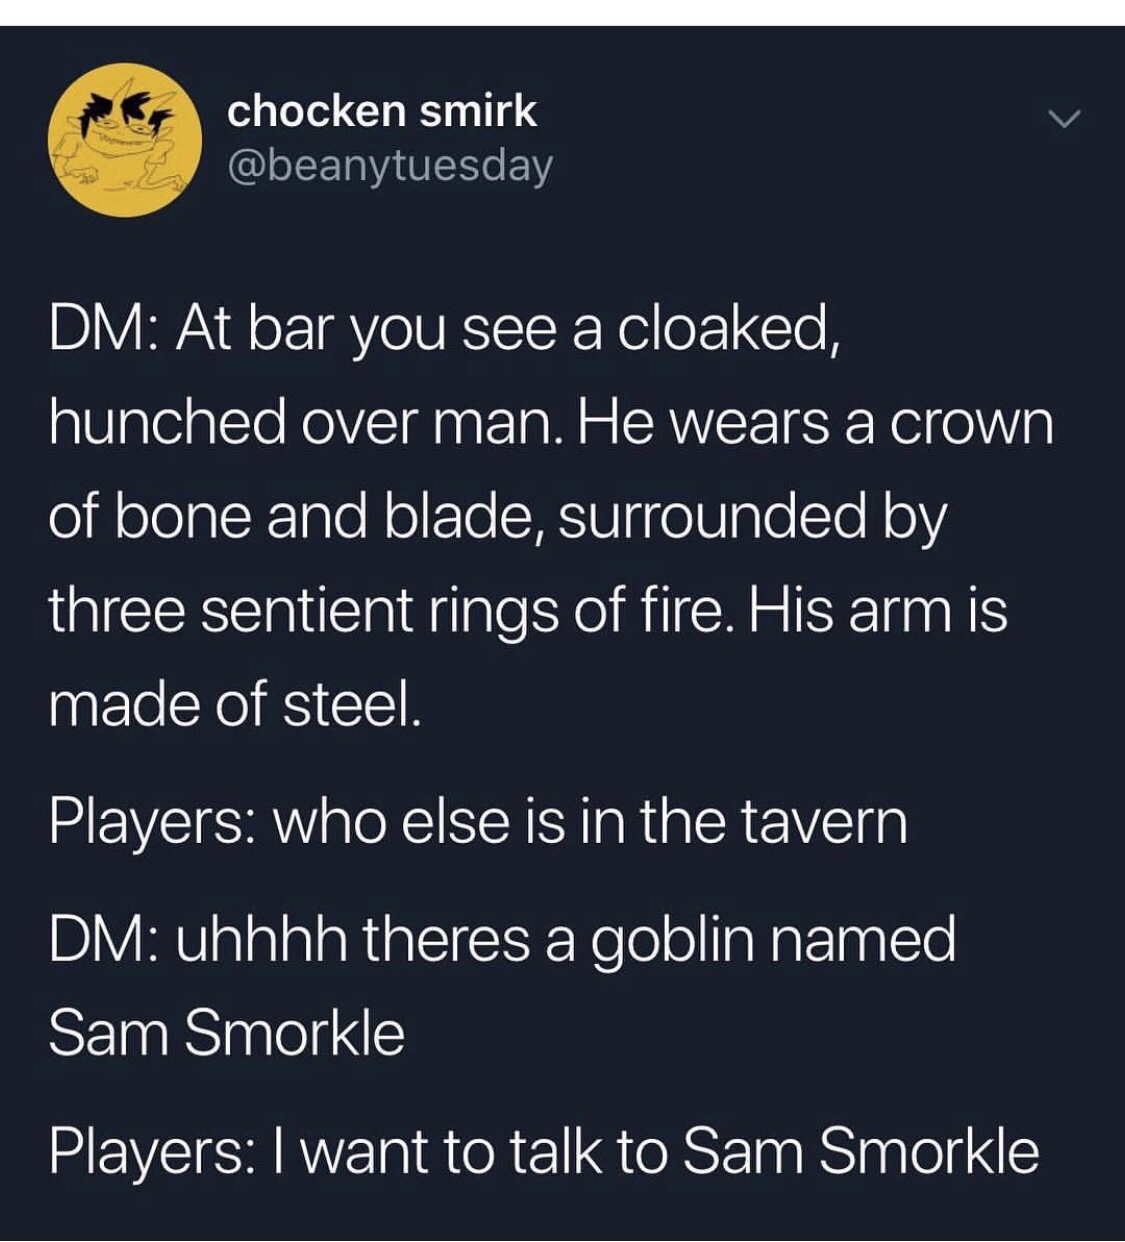 screenshot - chocken smirk Dm At bar you see a cloaked, hunched over man. He wears a crown of bone and blade, surrounded by three sentient rings of fire. His arm is made of steel. Players who else is in the tavern Dm uhhhh theres a goblin named Sam Smorkl